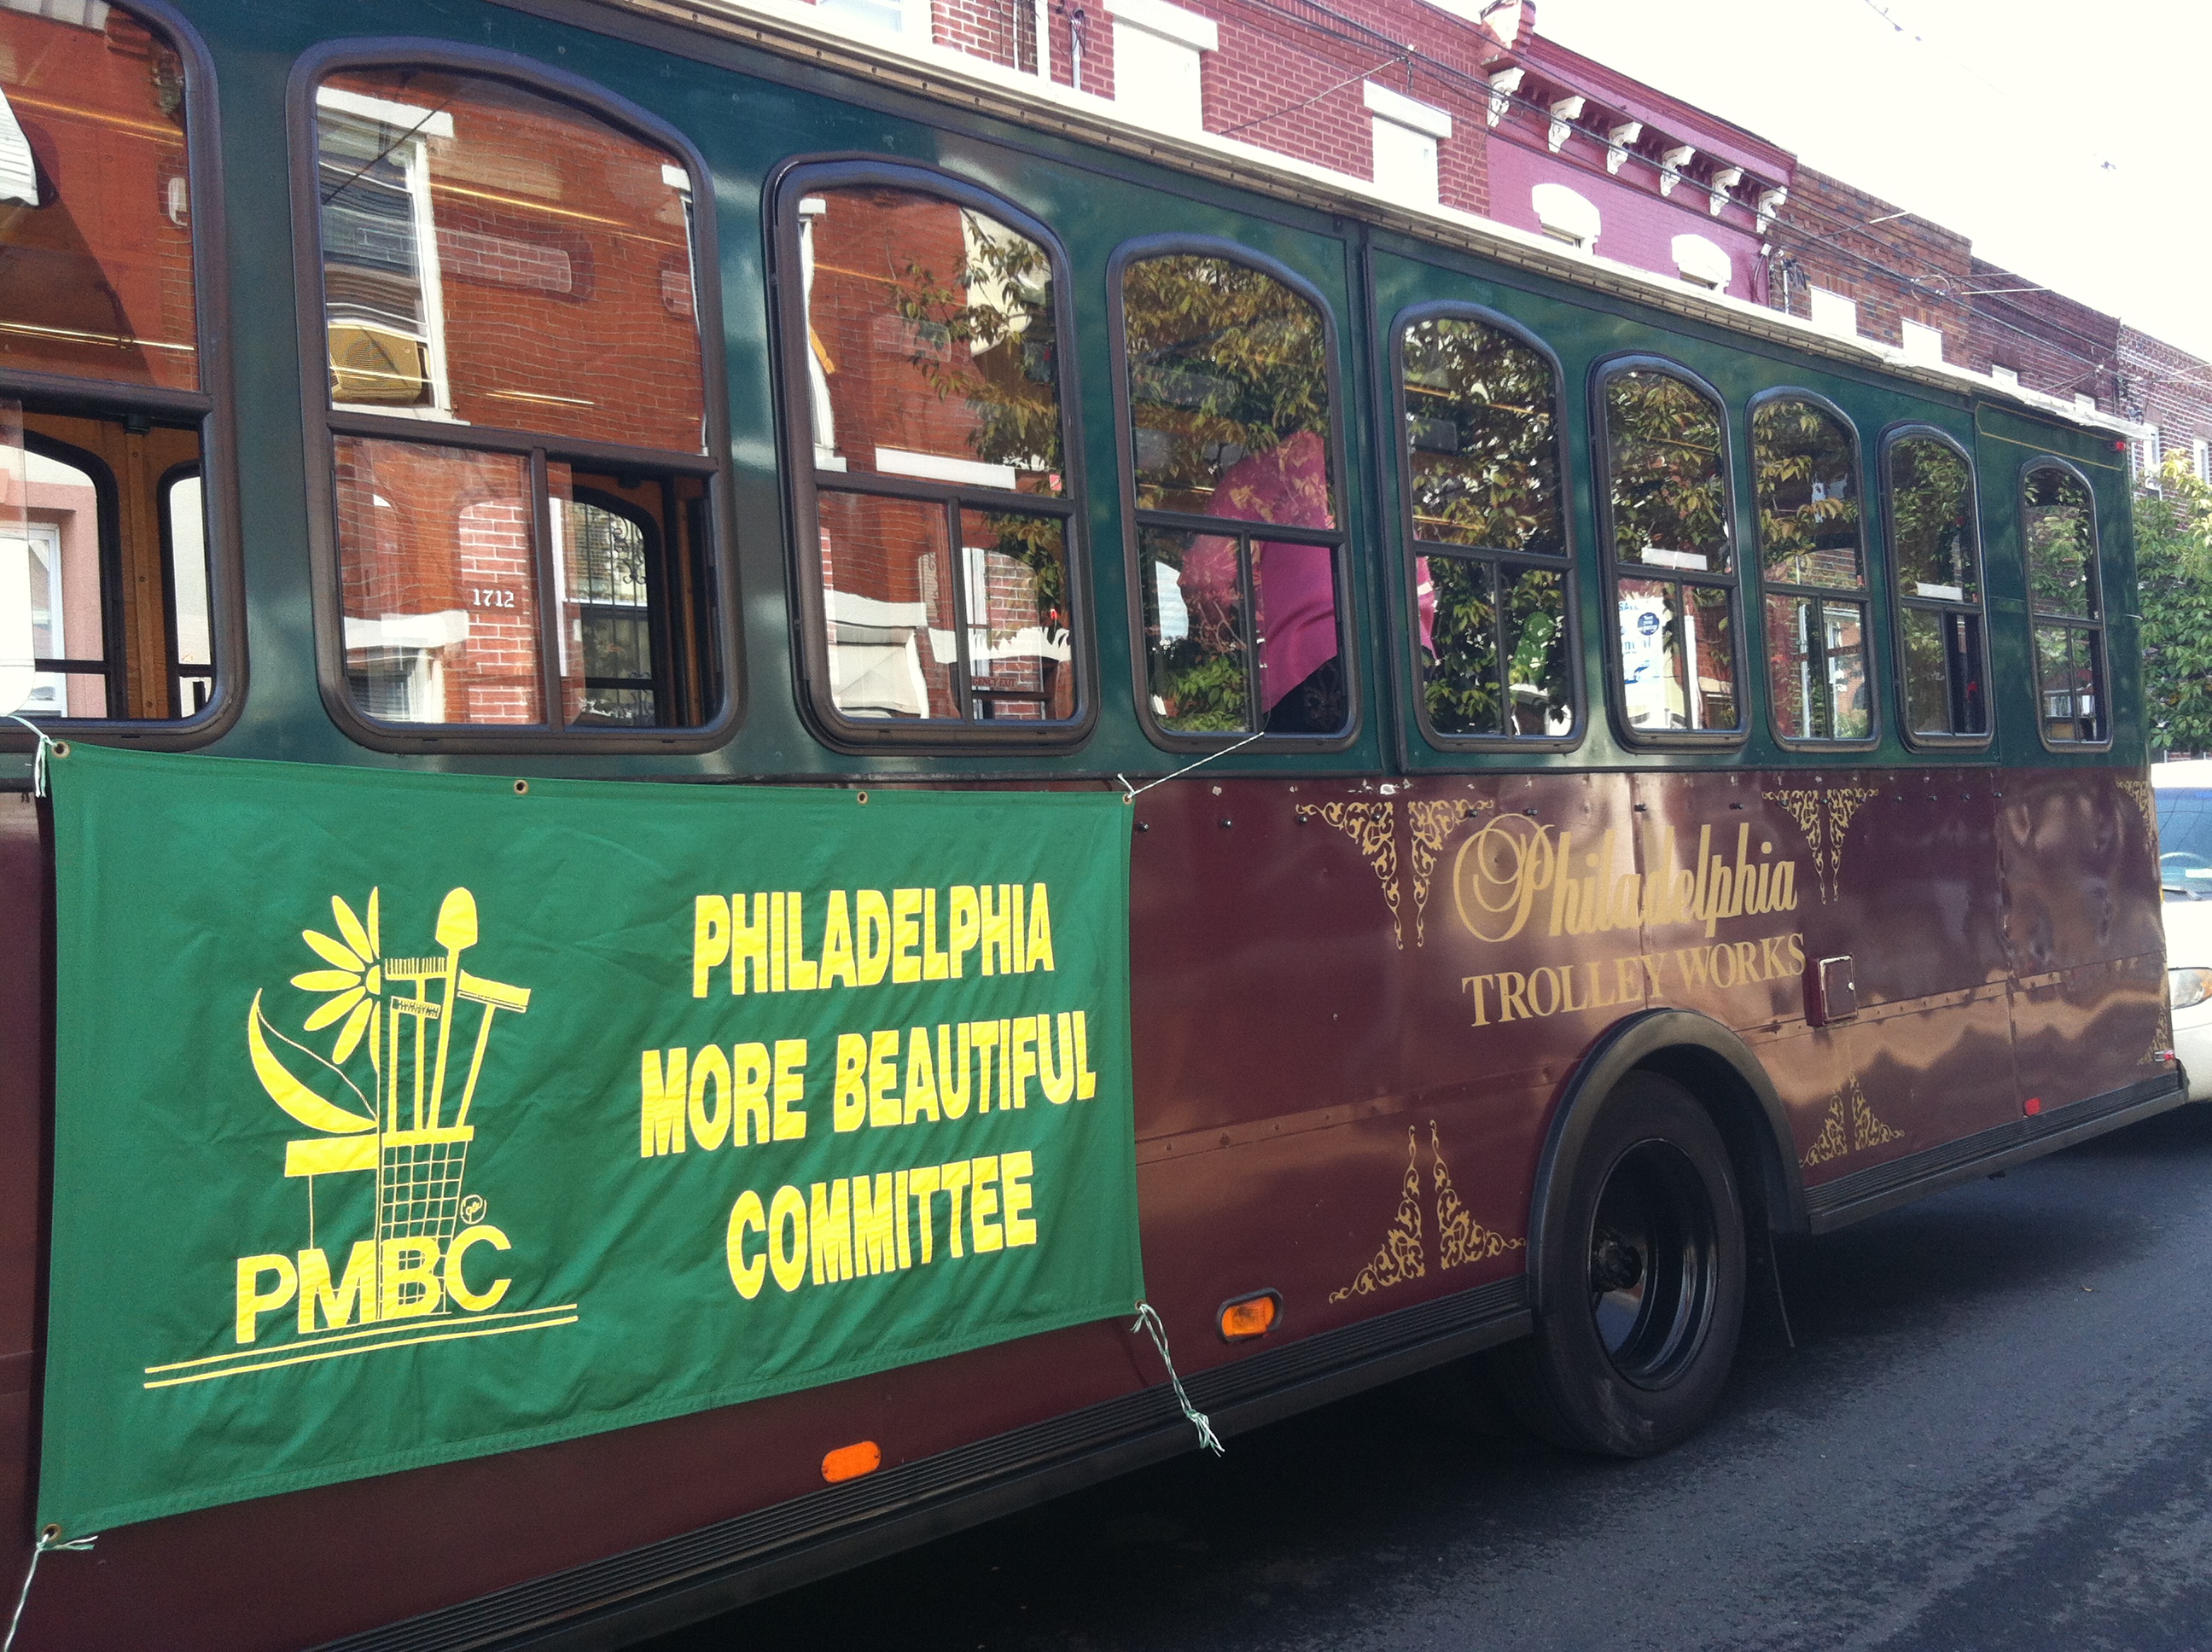 Around 20 citizen judges ride on the Philadelphia More Beautiful Clean Block Contest trolley escorted by police and several city vehicles.